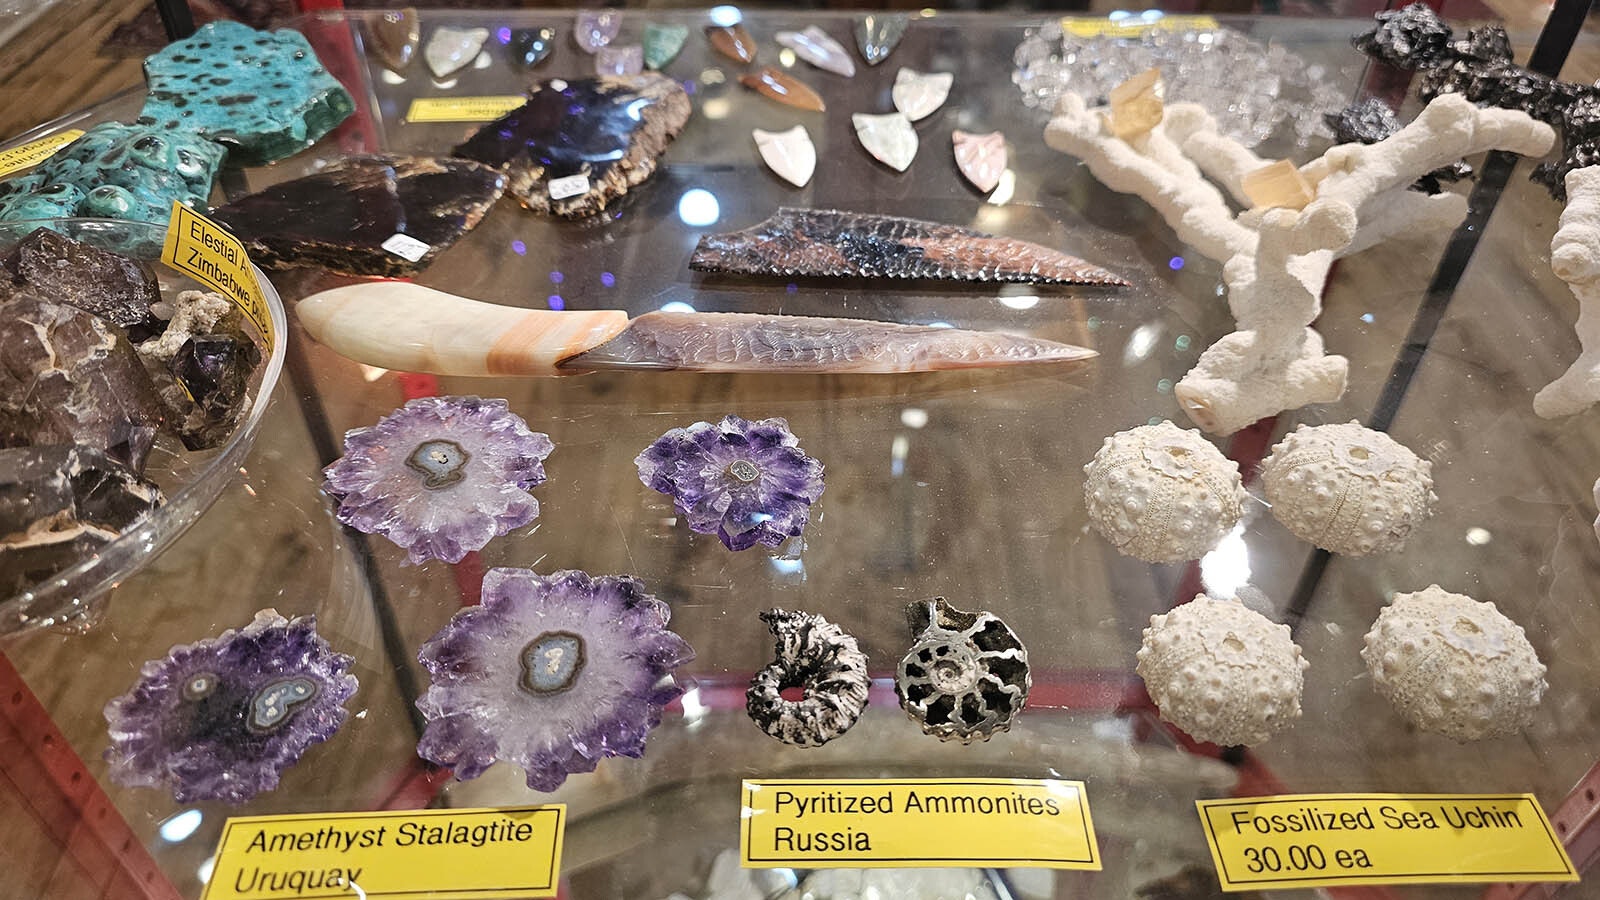 Ammonites fossilized sea urchins stalactite and other curiosities at Bohemian Metals.